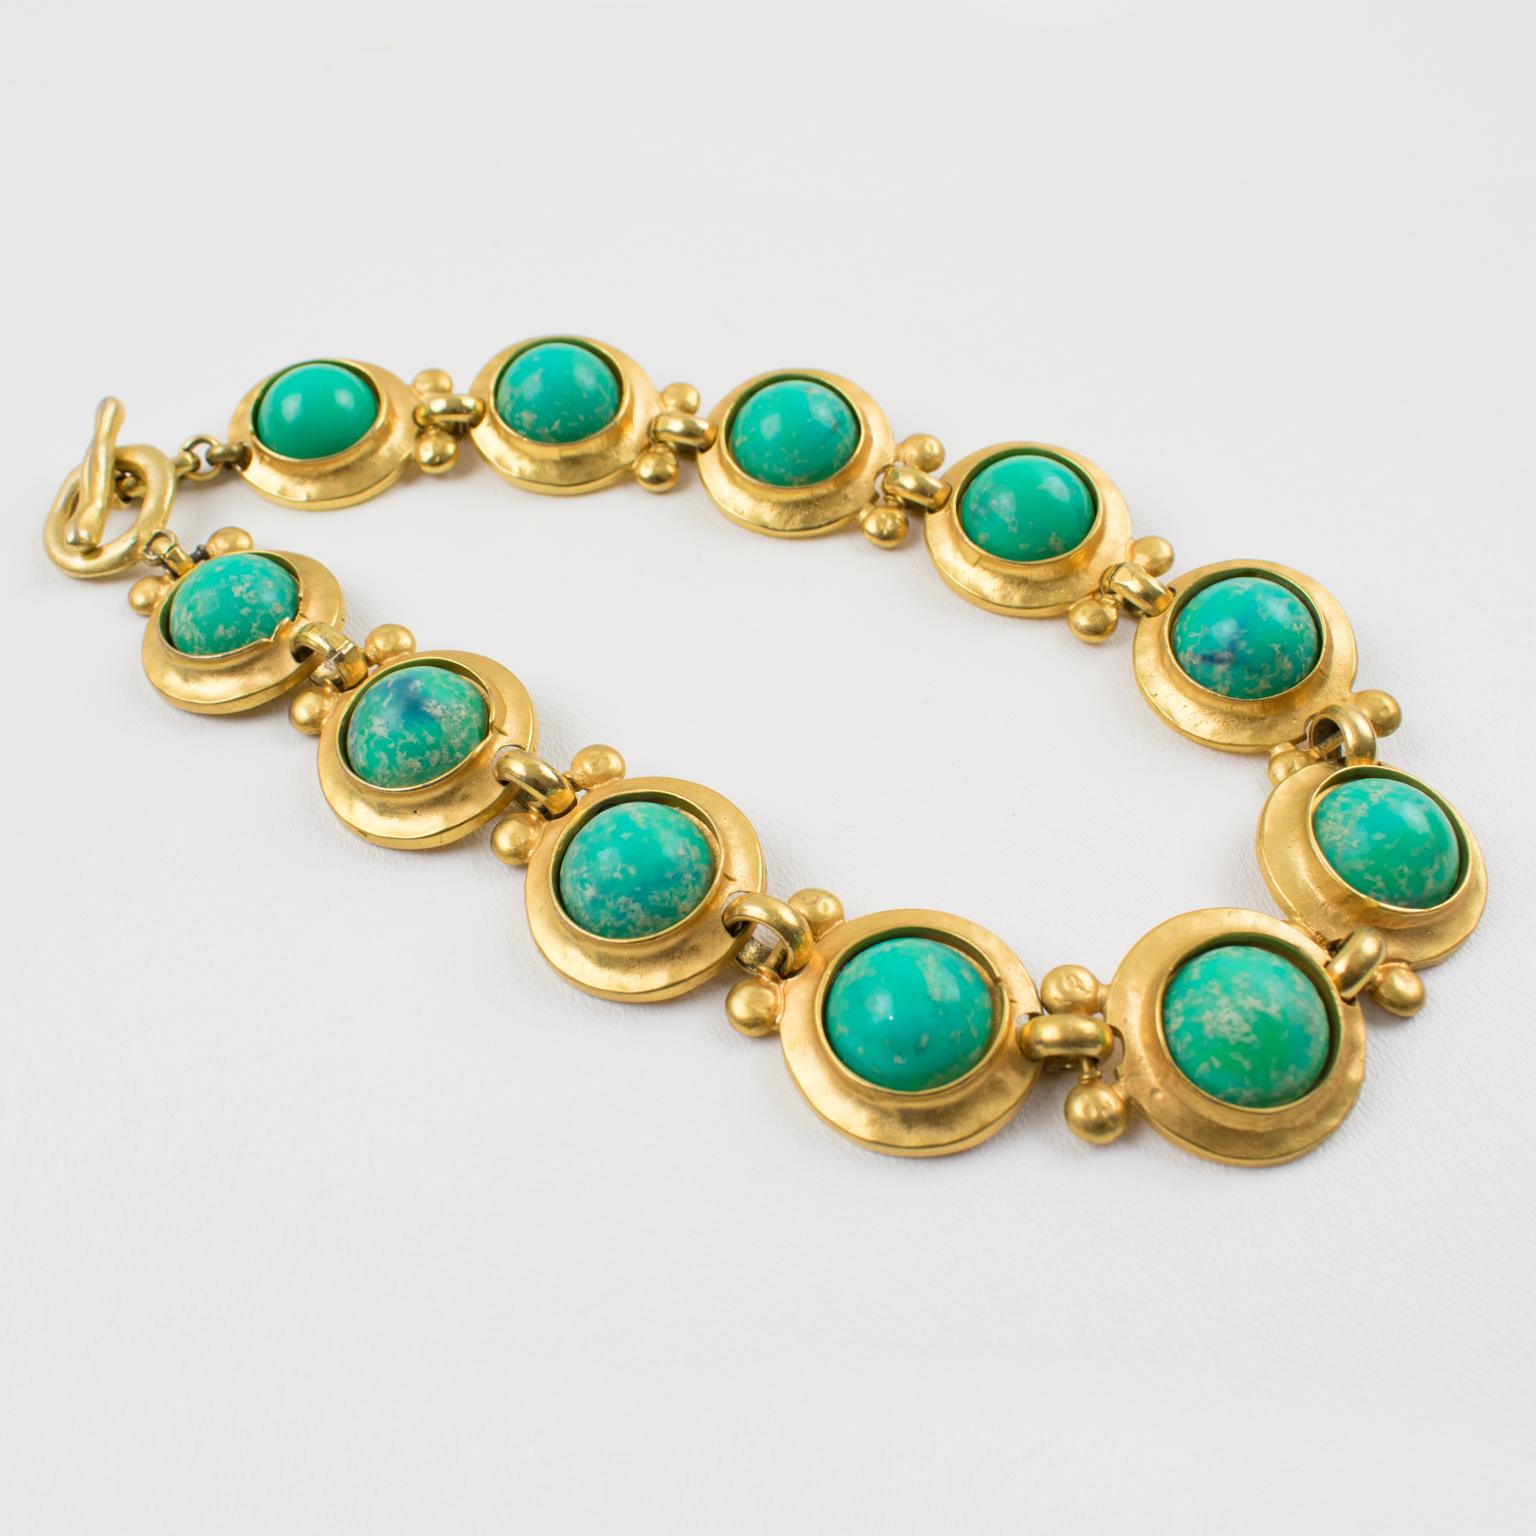 Women's or Men's Edouard Rambaud Paris Signed Choker Necklace Gilt Metal and Turquoise Cabochon